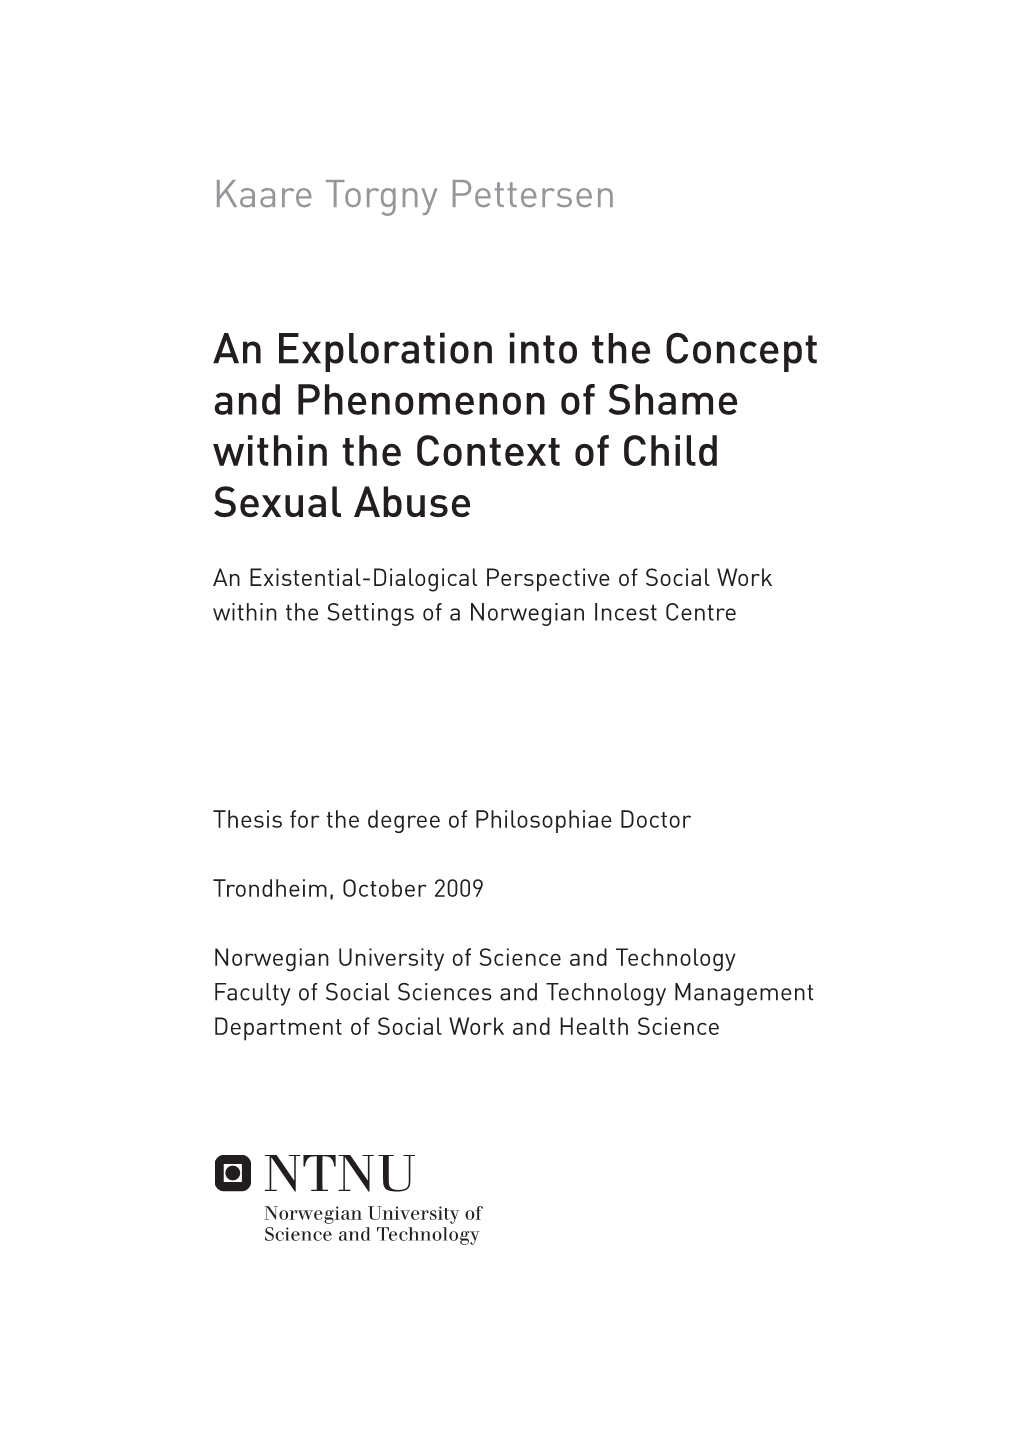 An Exploration Into the Concept and Phenomenon of Shame Within the Context of Child Sexual Abuse